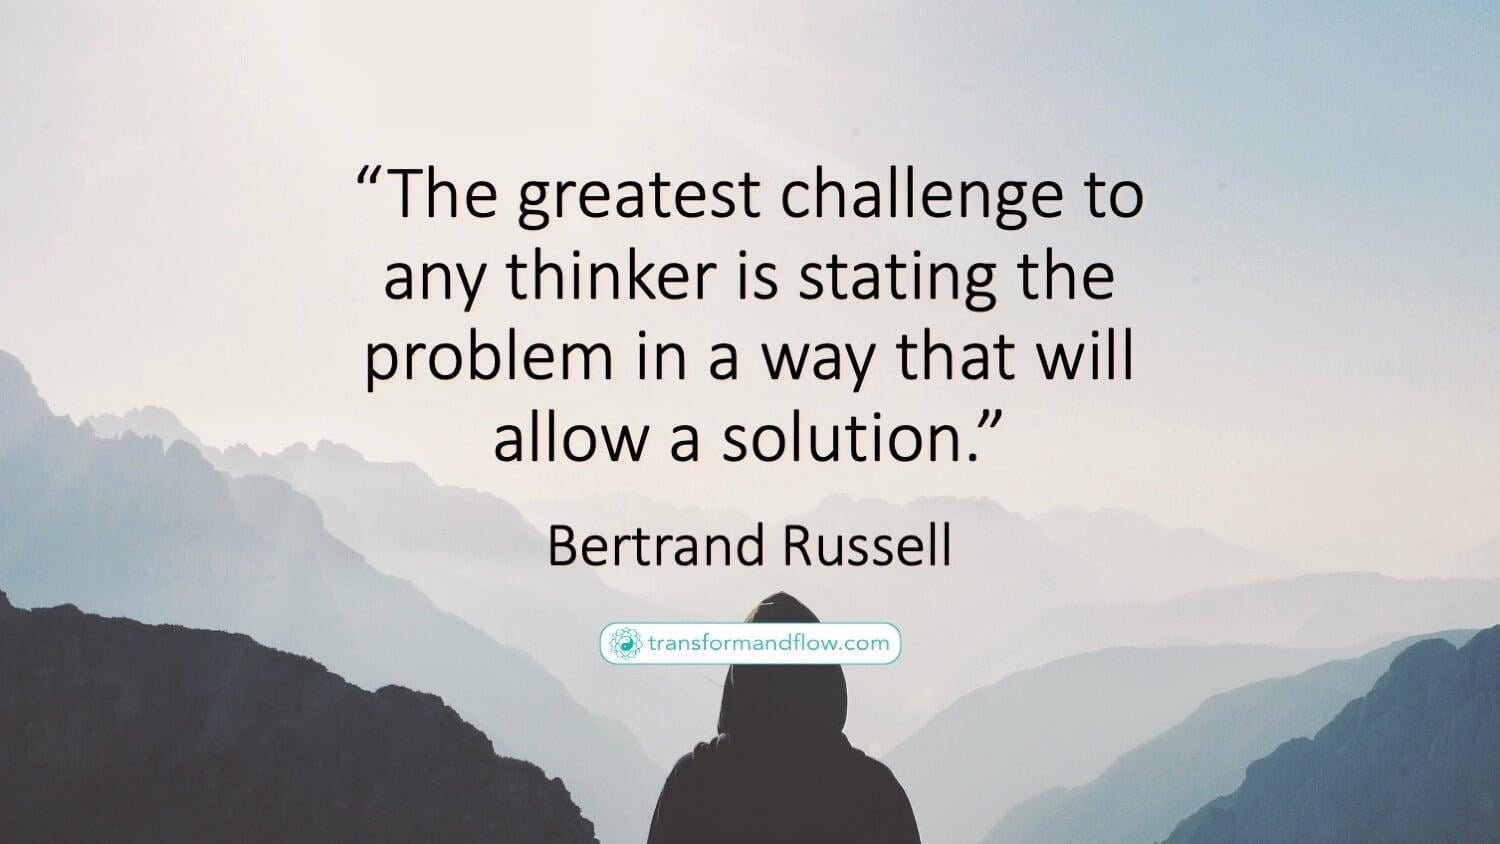 &quot;The greatest challenge to any thinker is stating the problem in a way that will allow a solution.&quot; Bertrand Russell